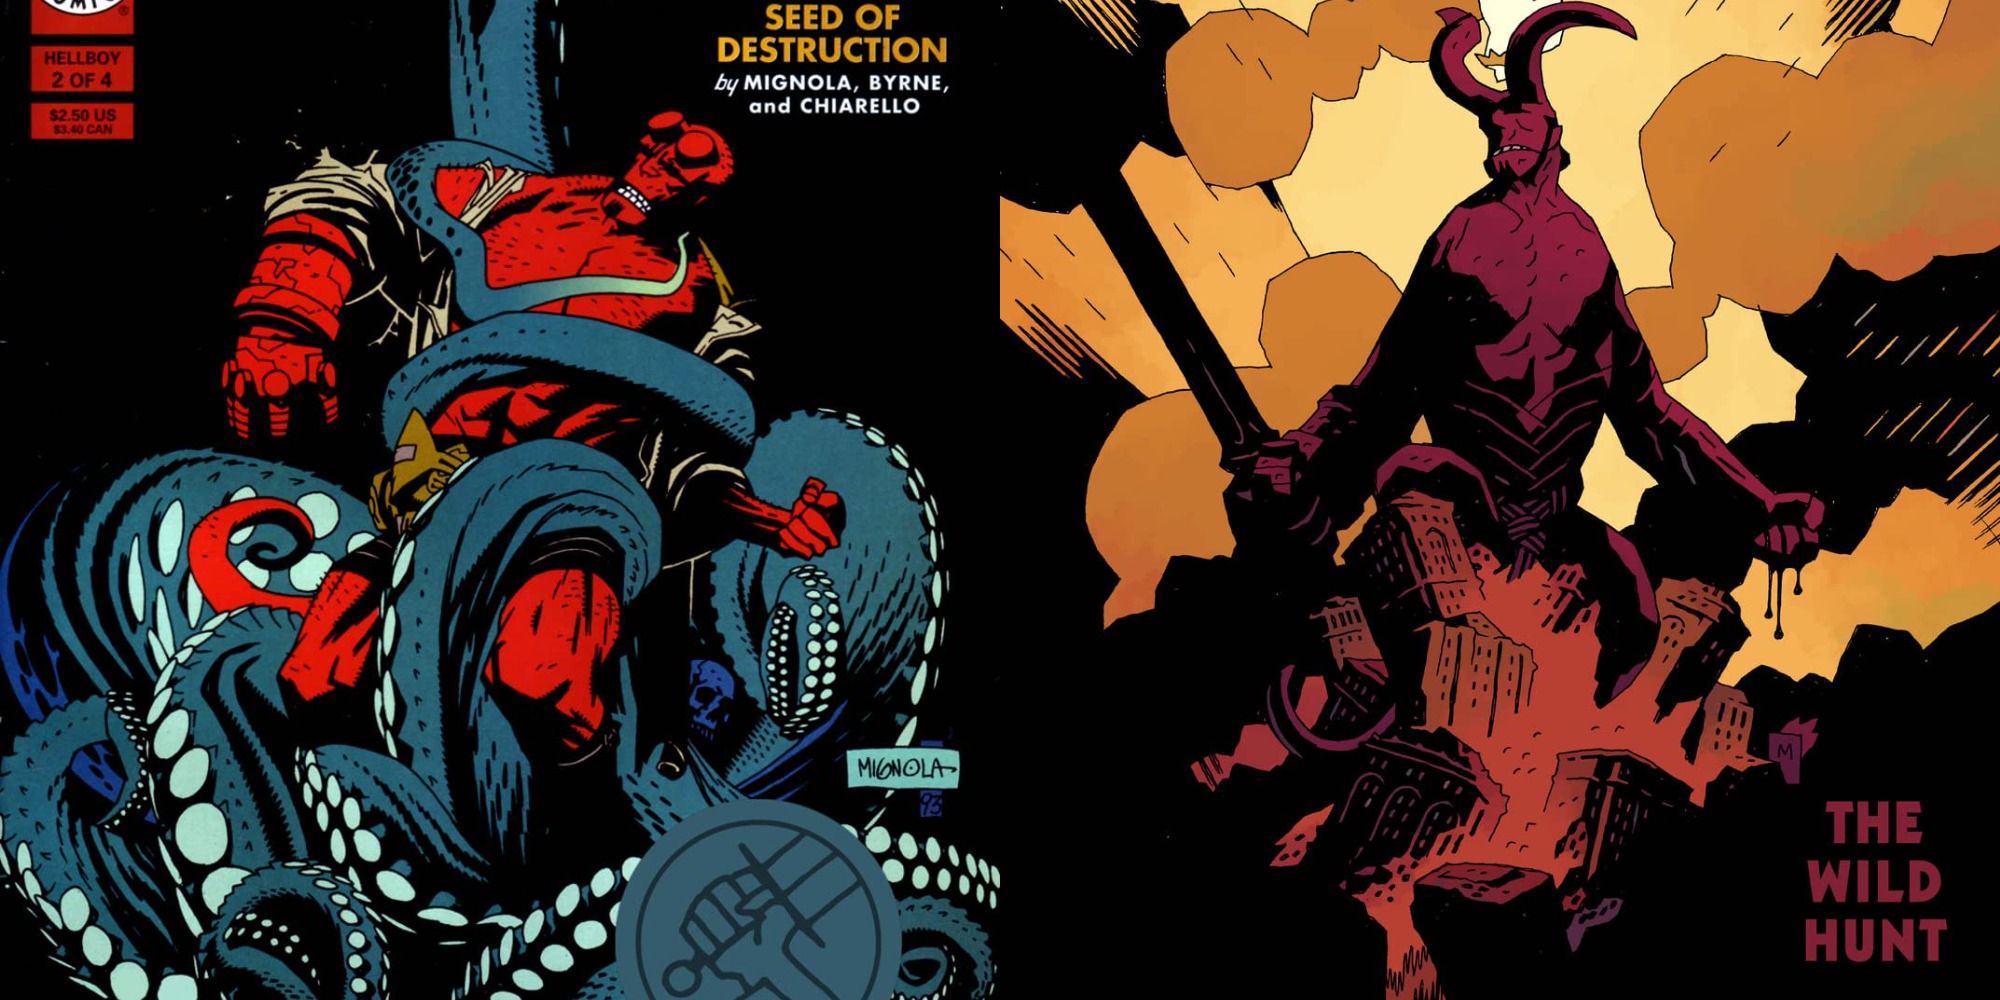 Split image showing the covers for Hellboy Seed of Destruction and The Wild Hunt.